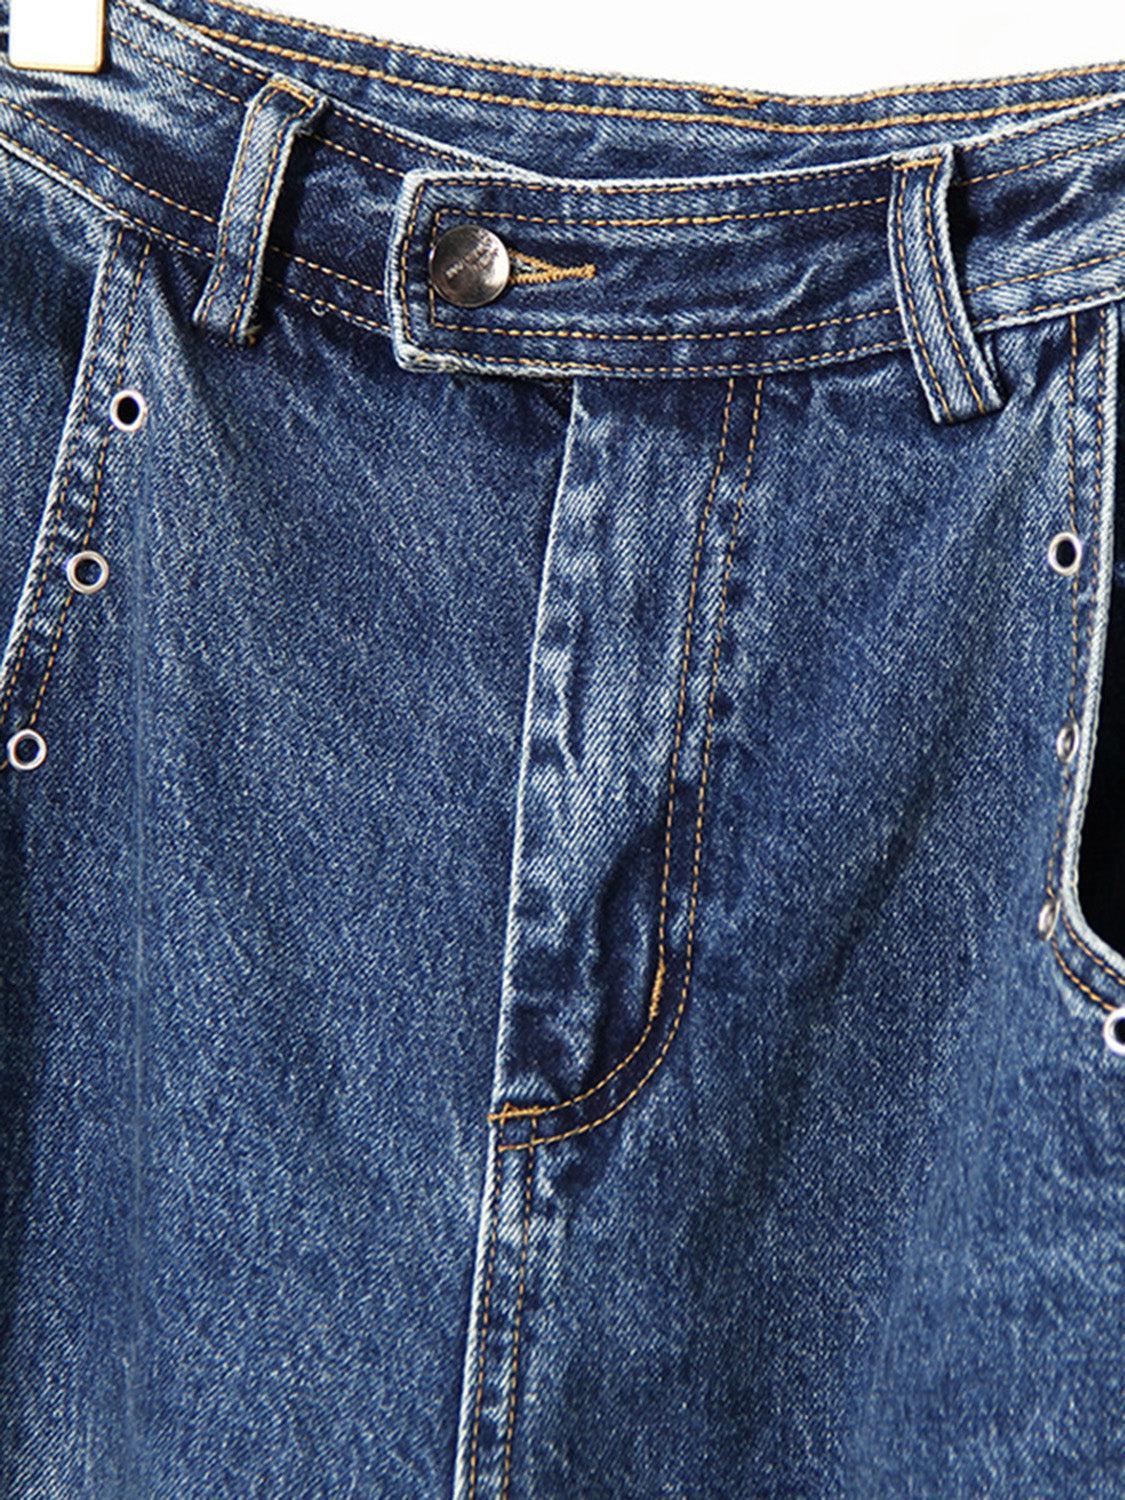 a close up of a person wearing a jean skirt